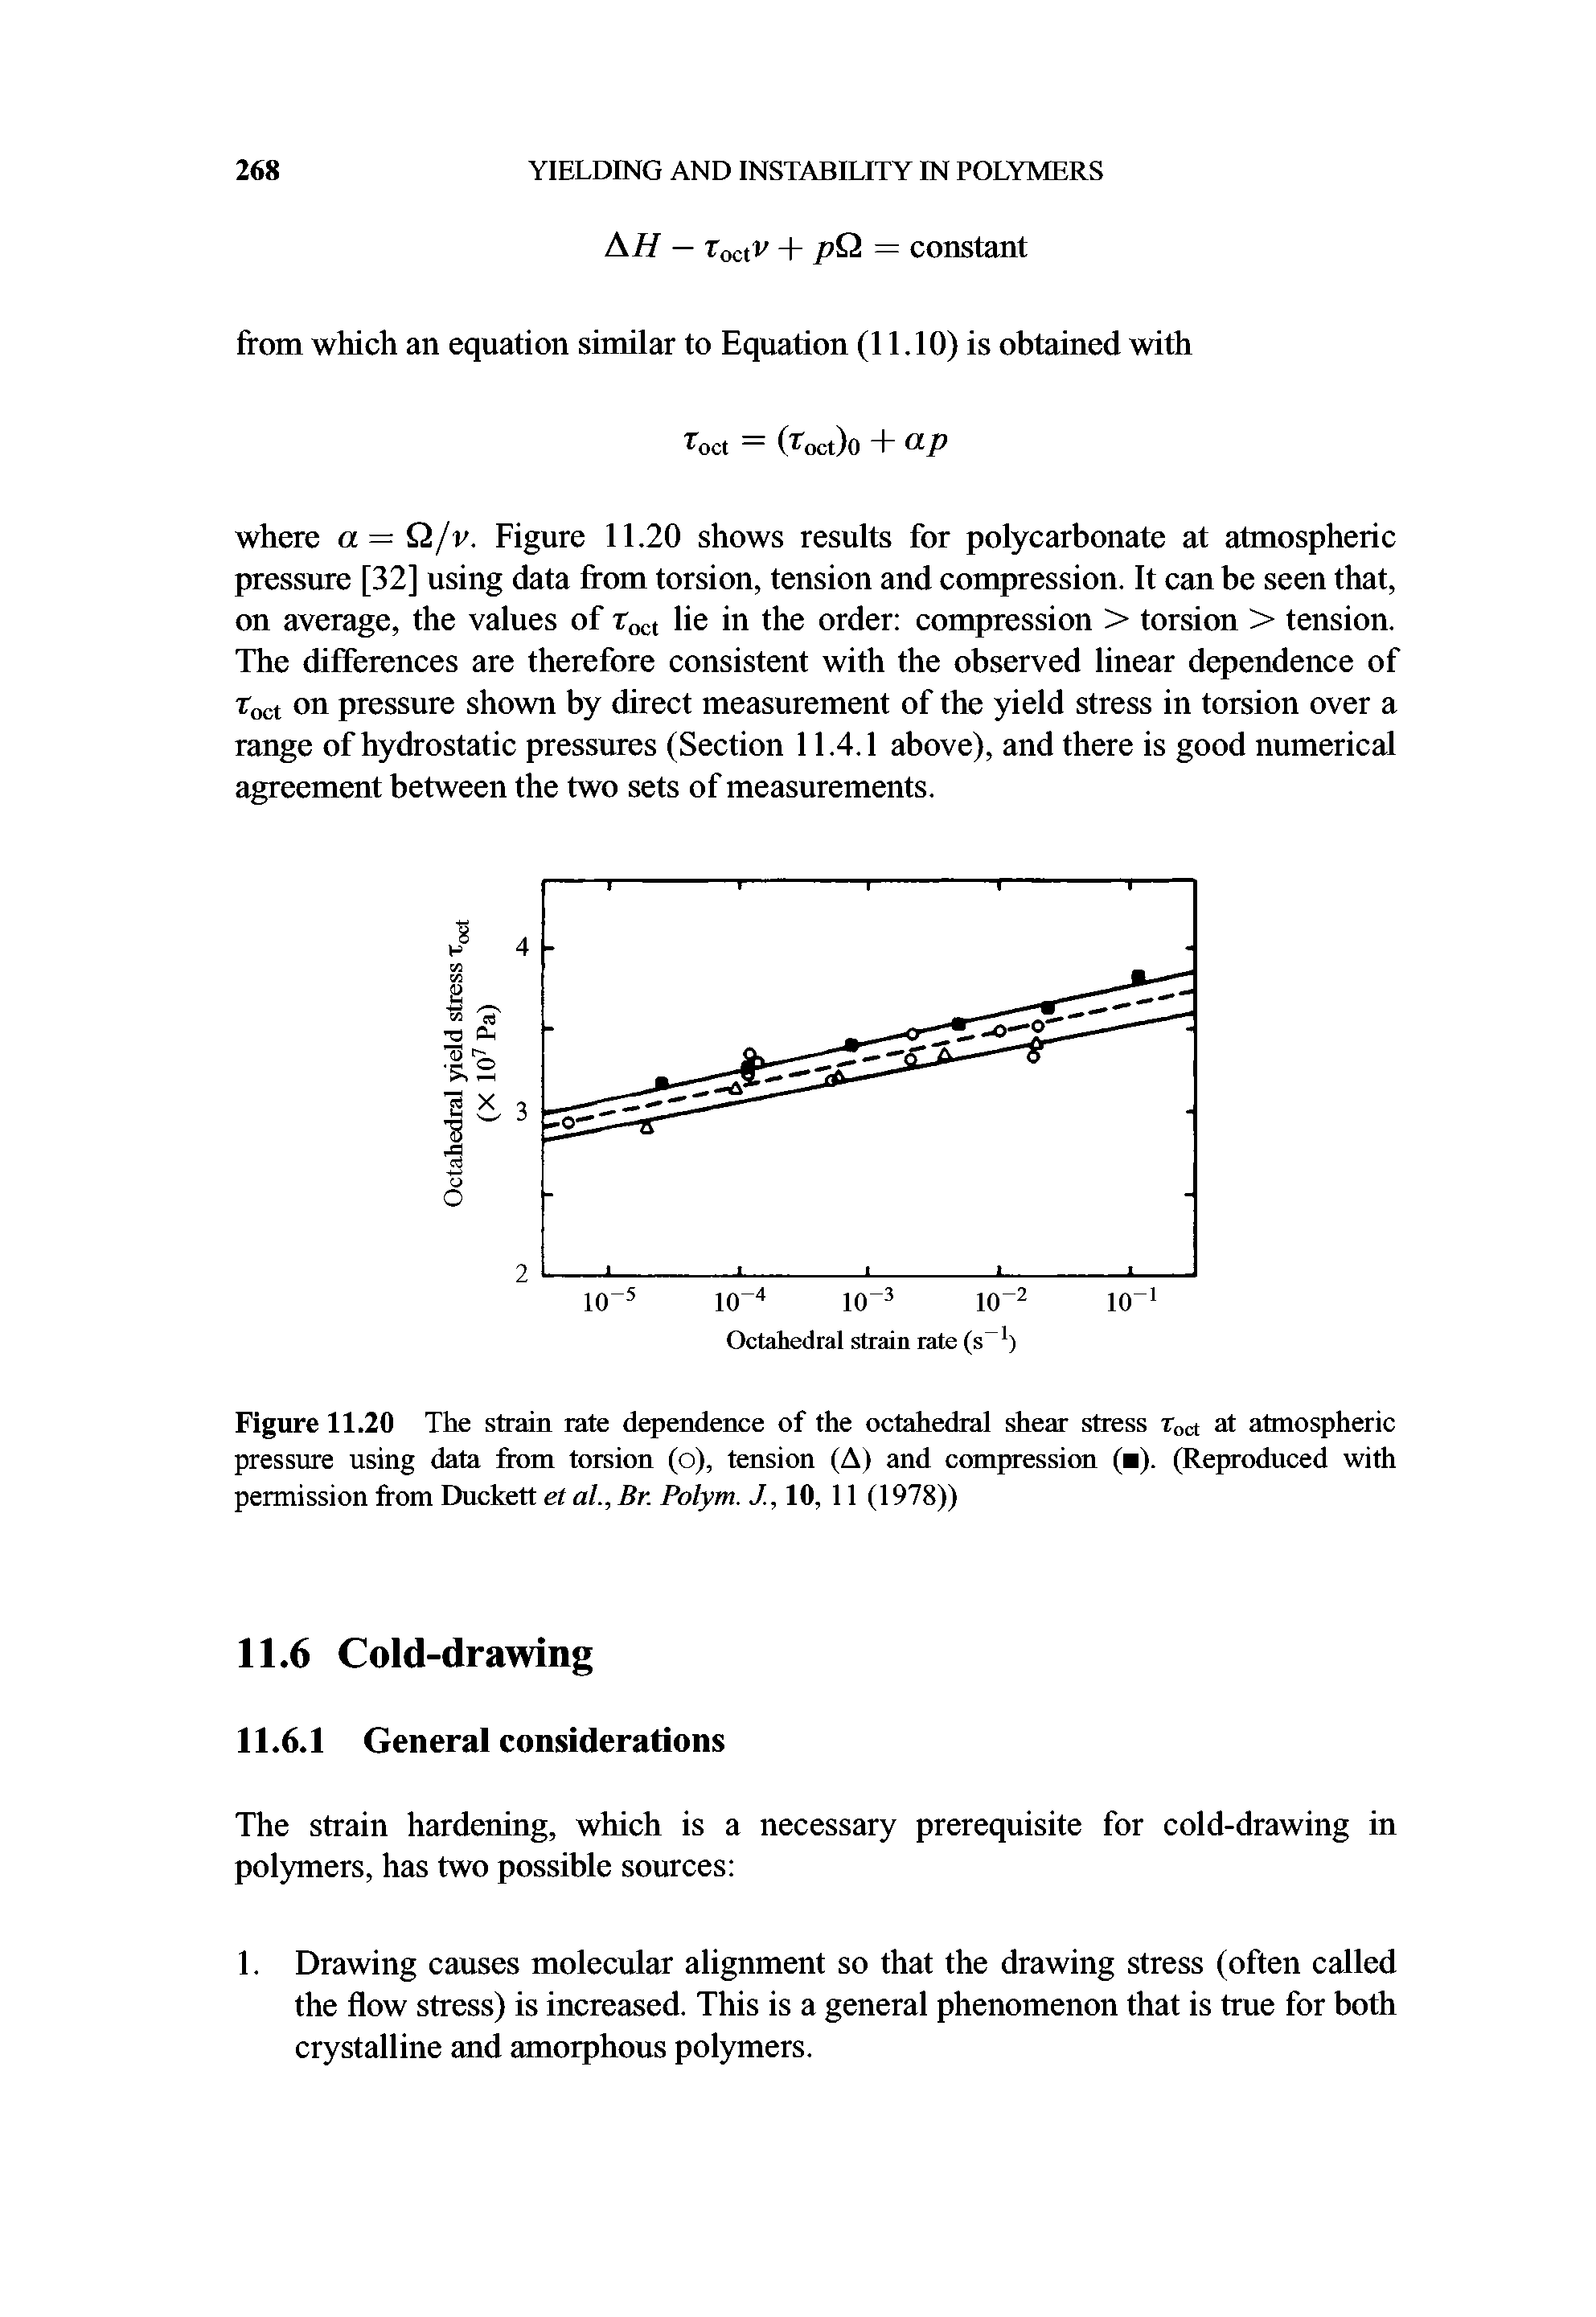 Figure 11.20 The strain rate dependence of the octahedral shear stress Toct at atmospheric pressure using data from torsion (o), tension (A) and compression ( ). (Reproduced with permission from Duckett et al., Br. Polym. J., 10, 11 (1978))...